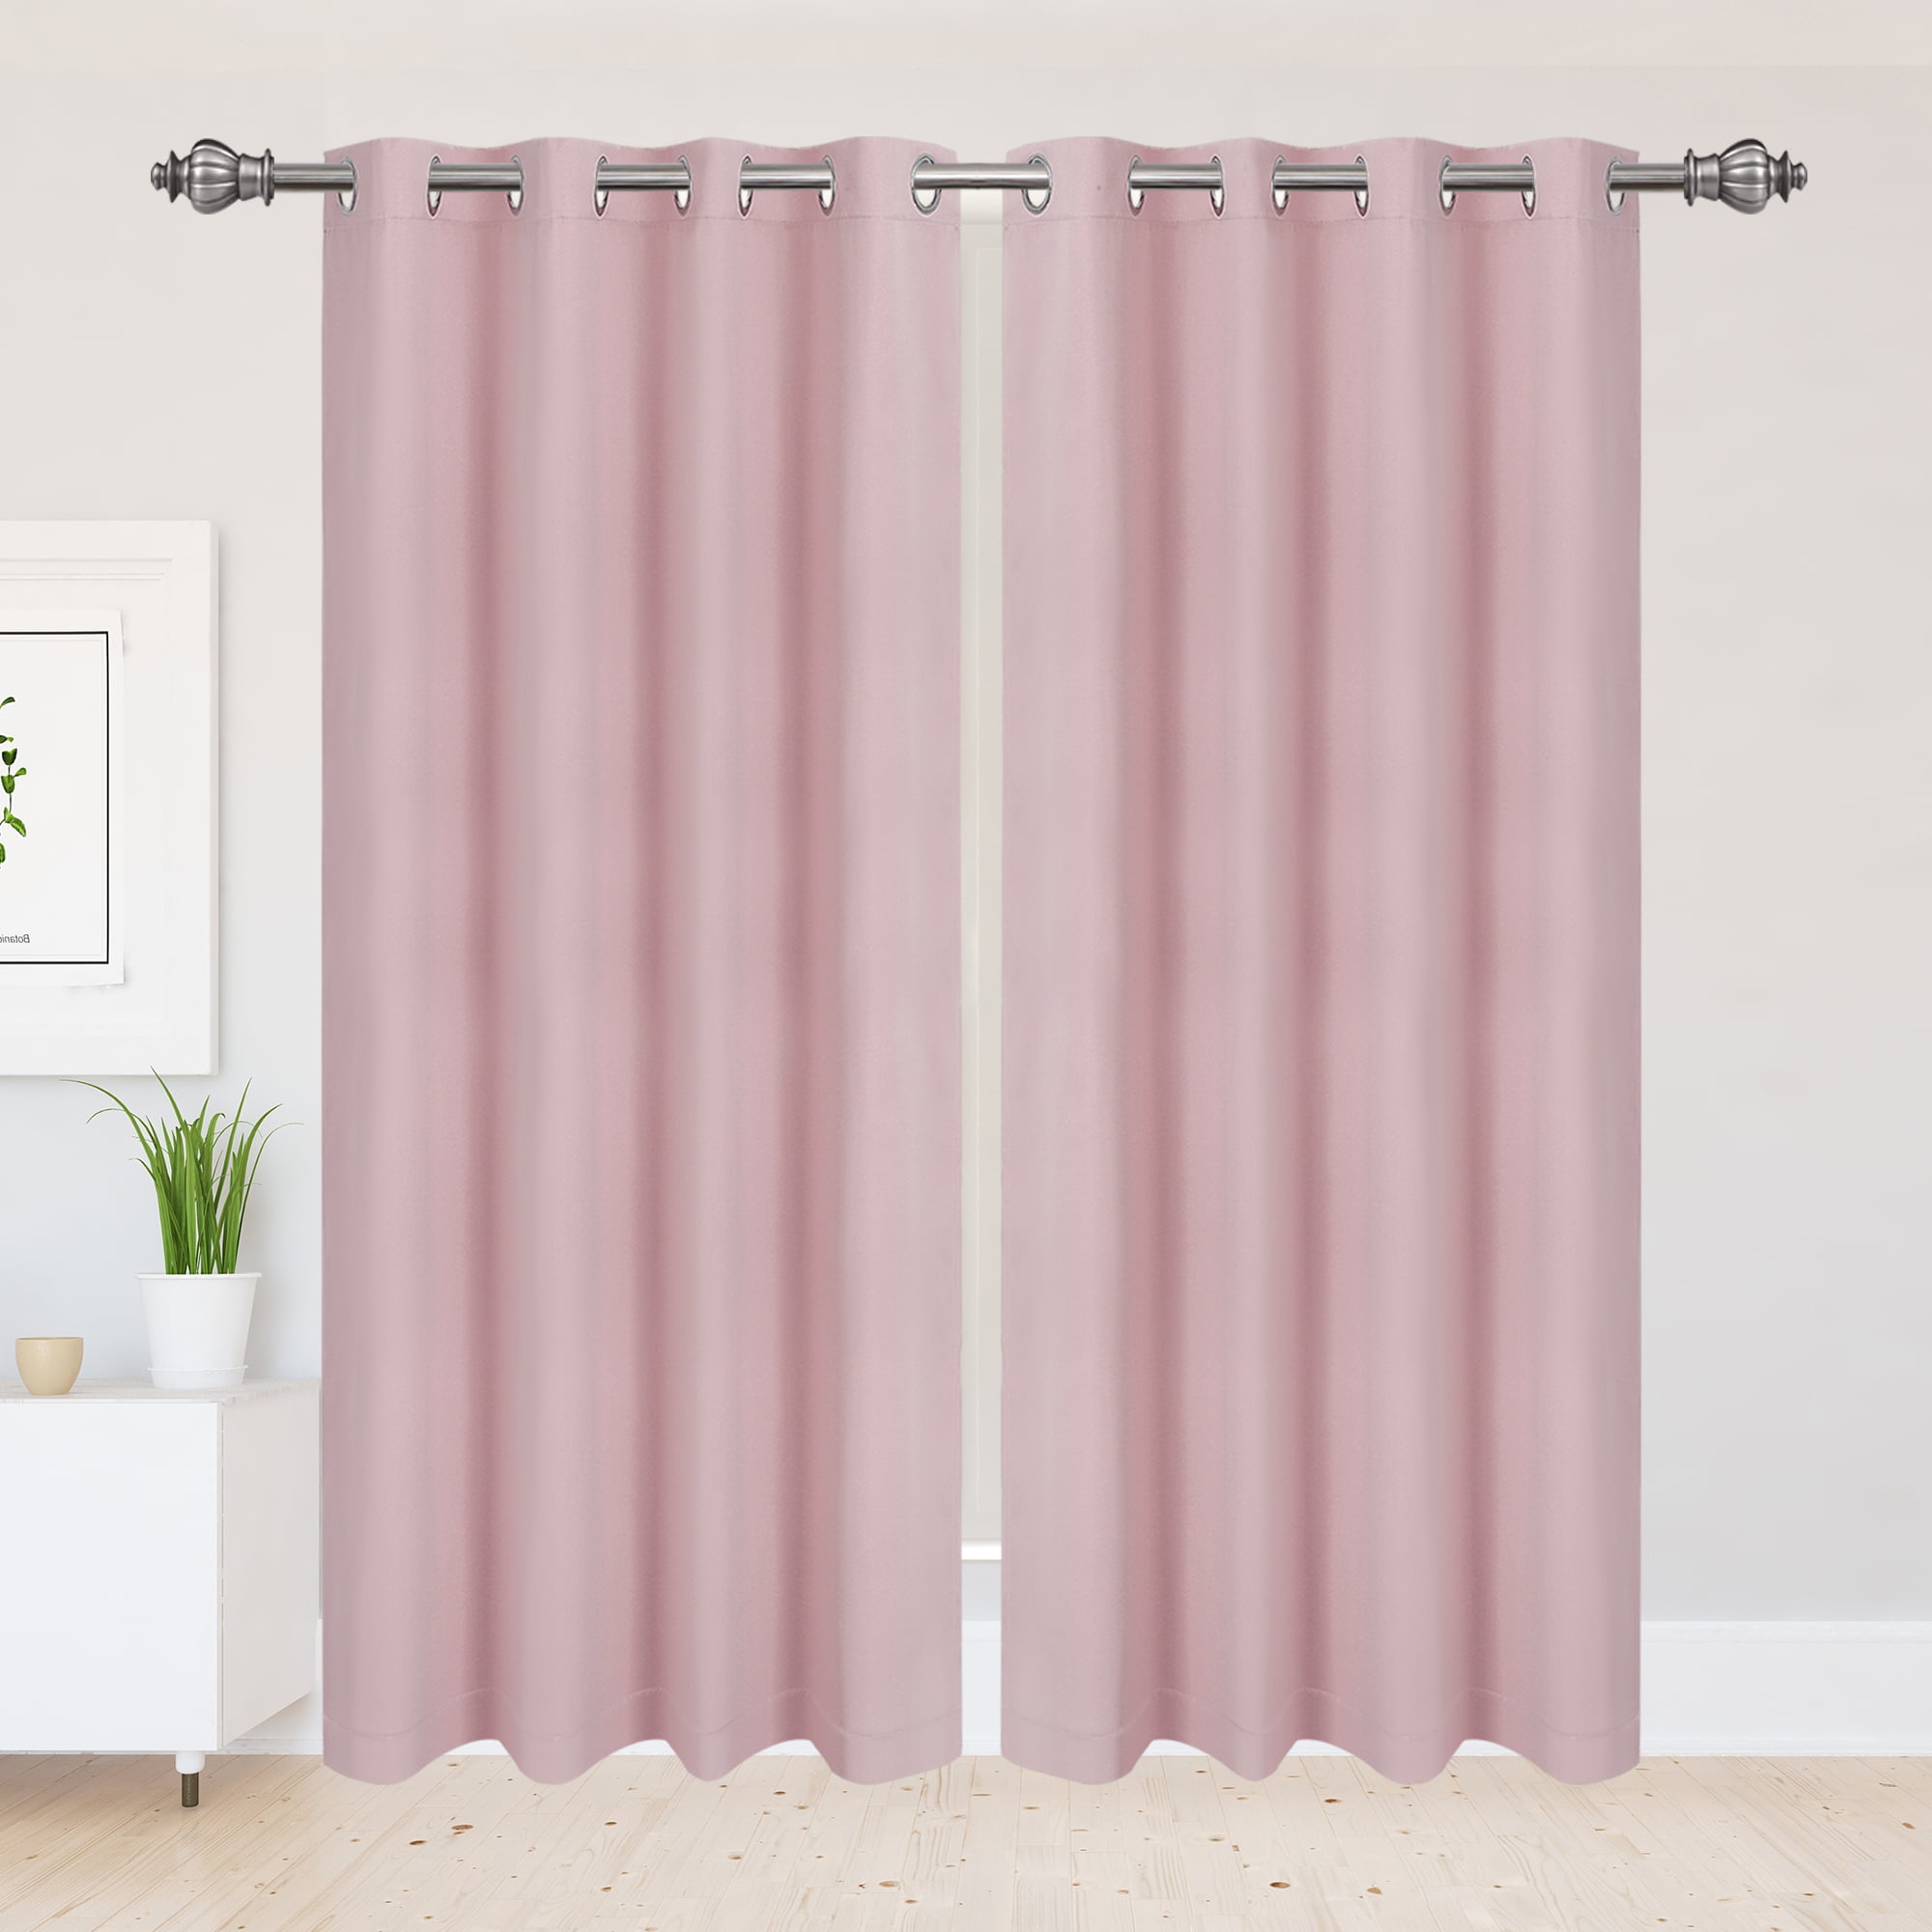 Details about   2pcs Ceiling Wall Mounted Curtain Rods Brackets for Curtains Drapes Shower 